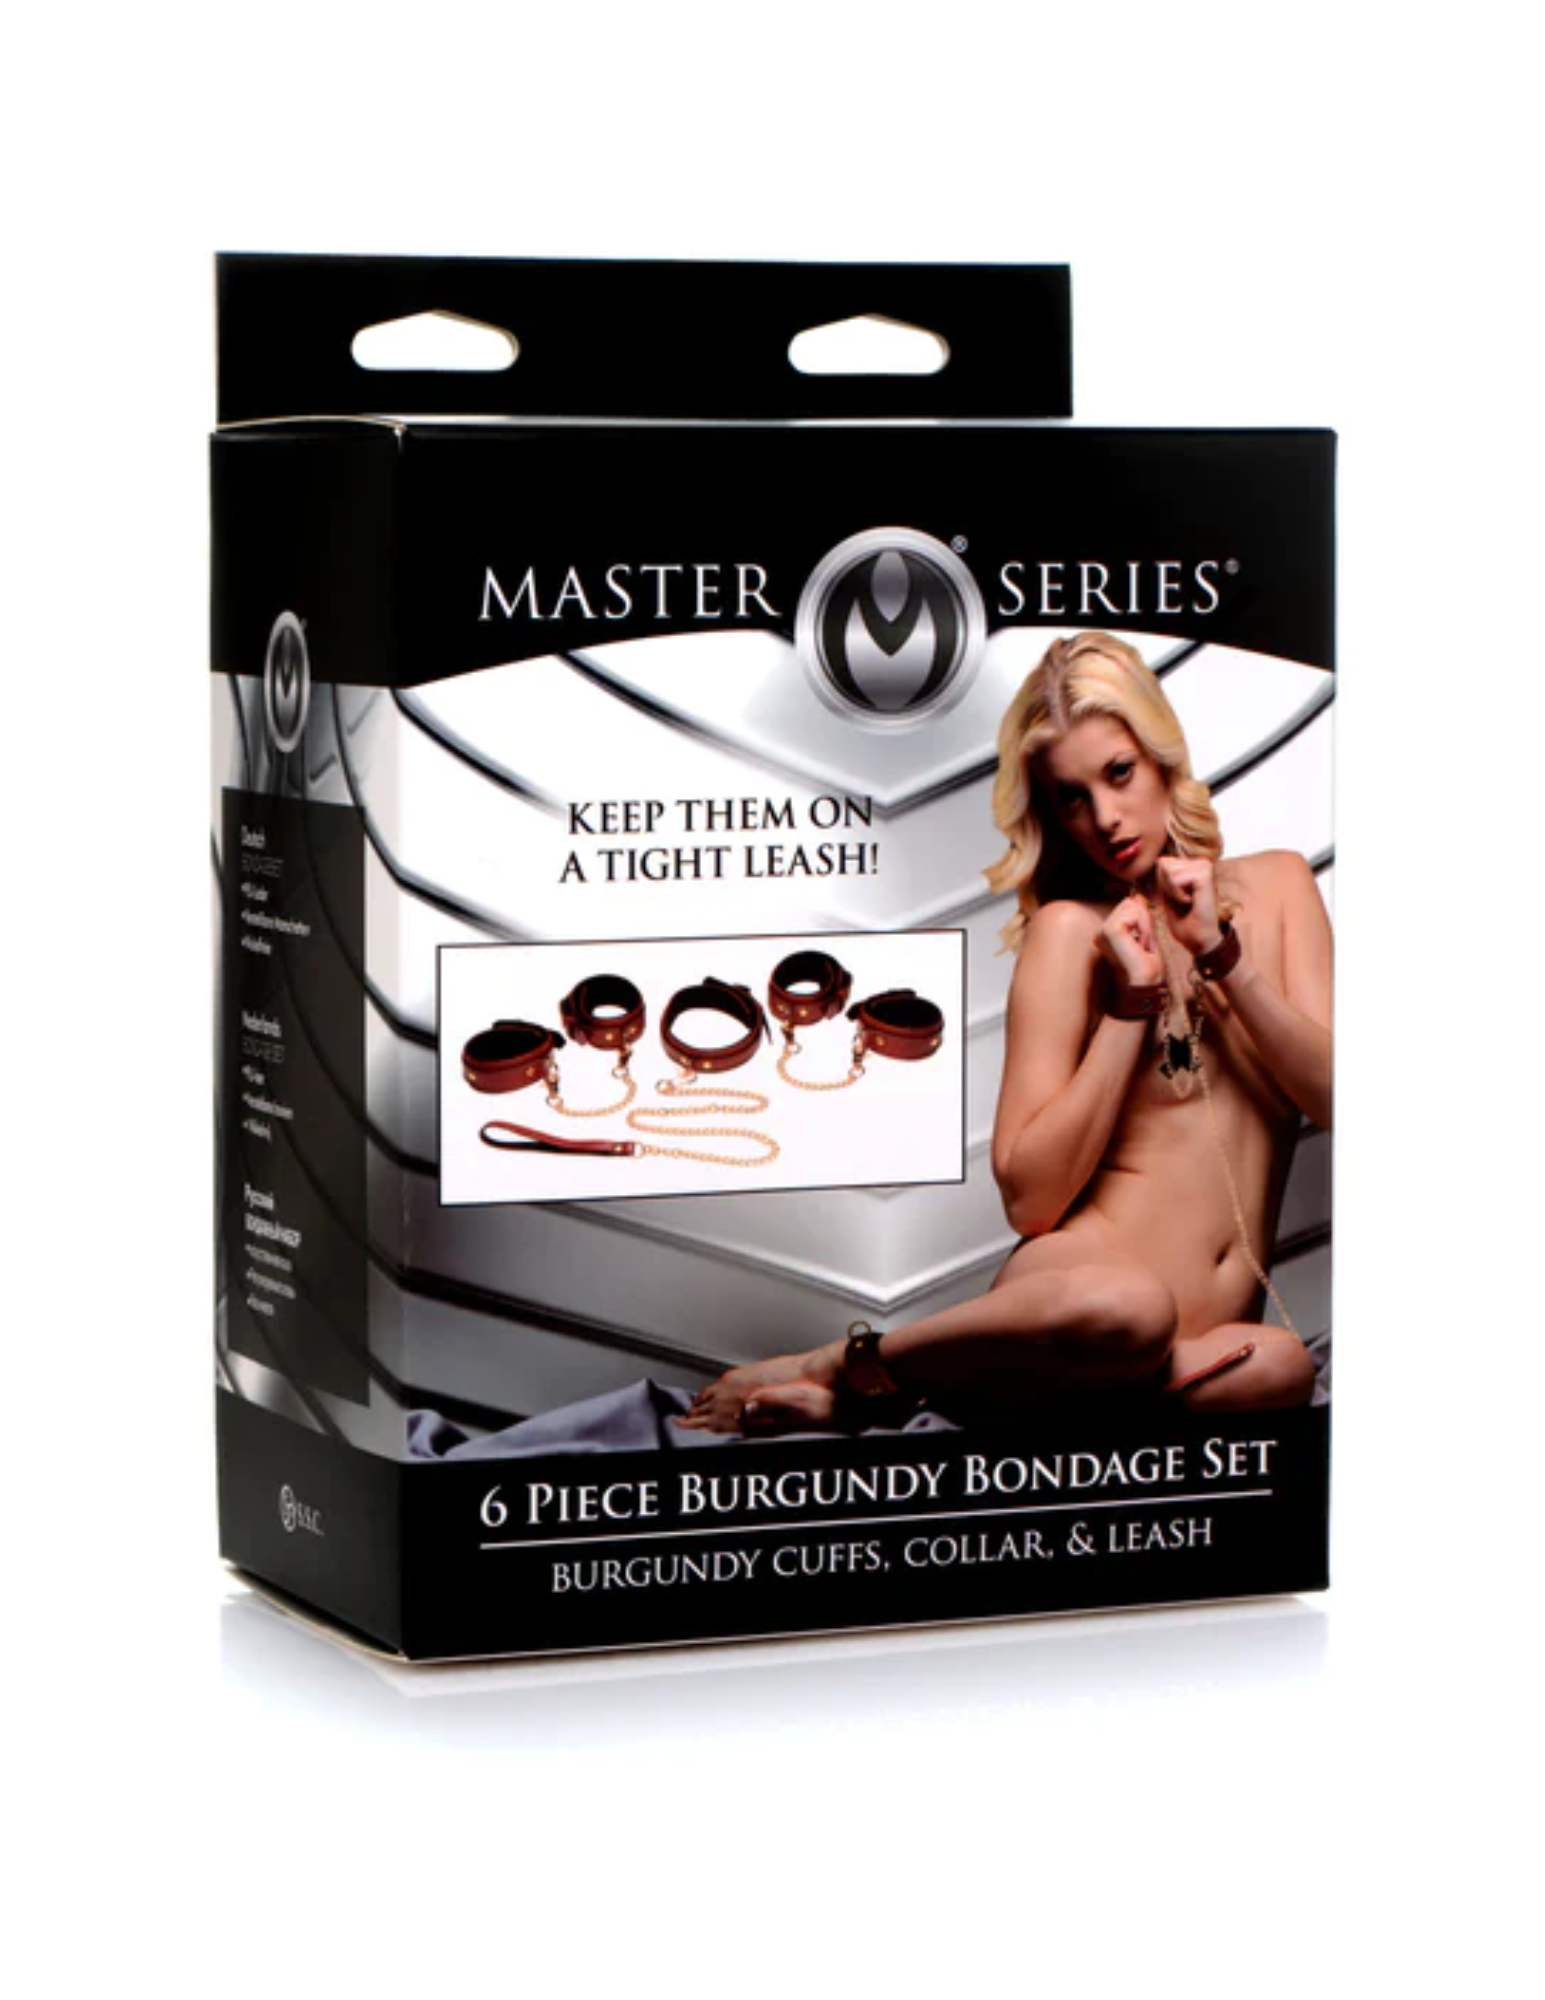 Photo of the box for the  Burgundy 6pc Bondage Set from Master Series and XR Brands.